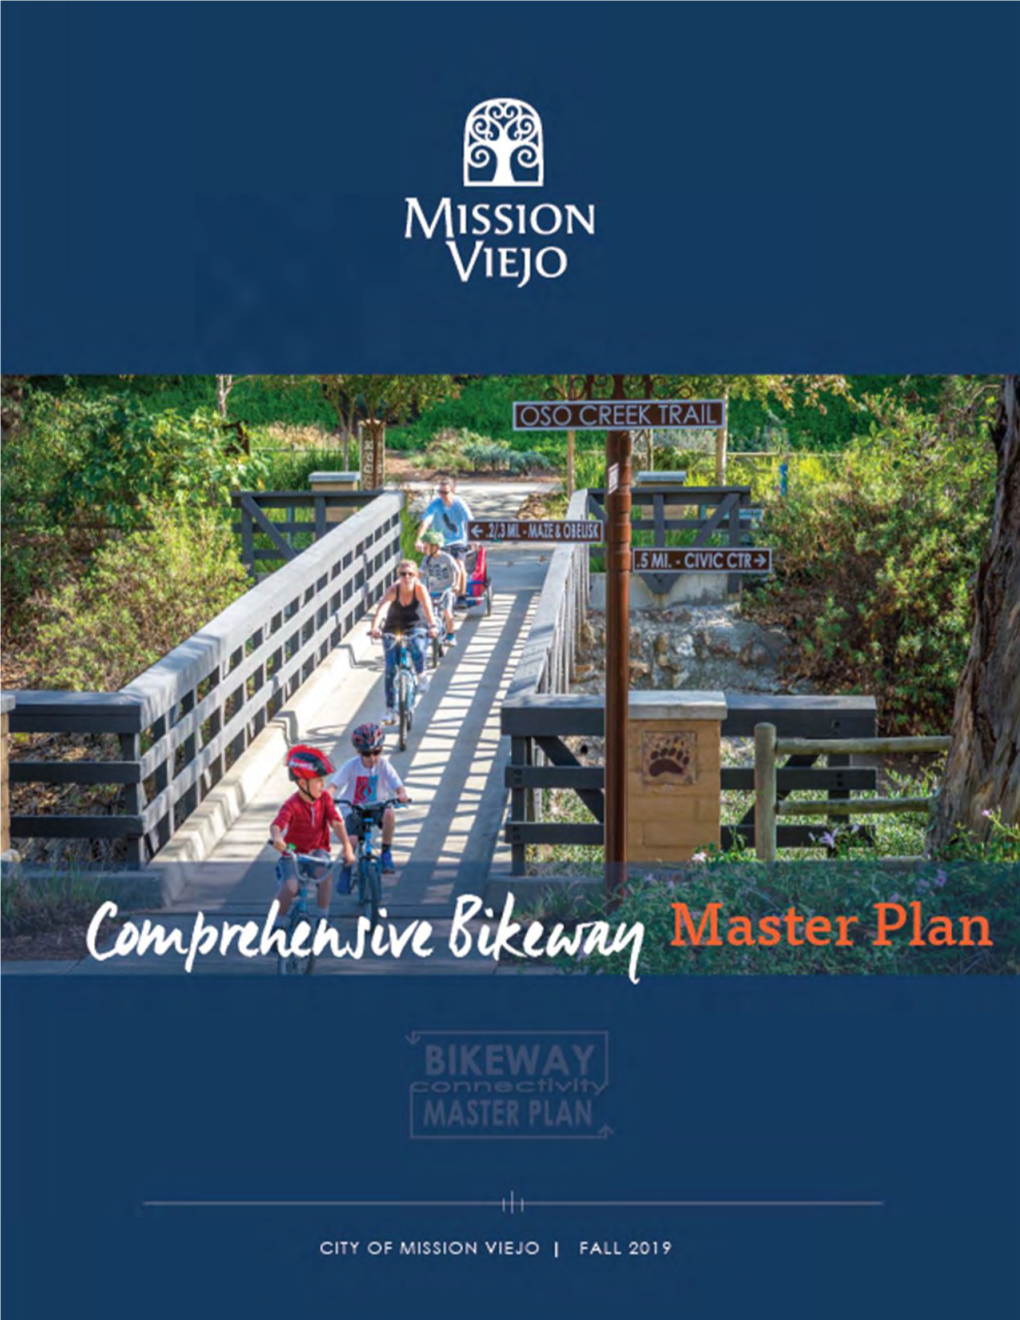 Comprehensive Bikeway Master Plan Proposes a Few of These “Connecting Links”